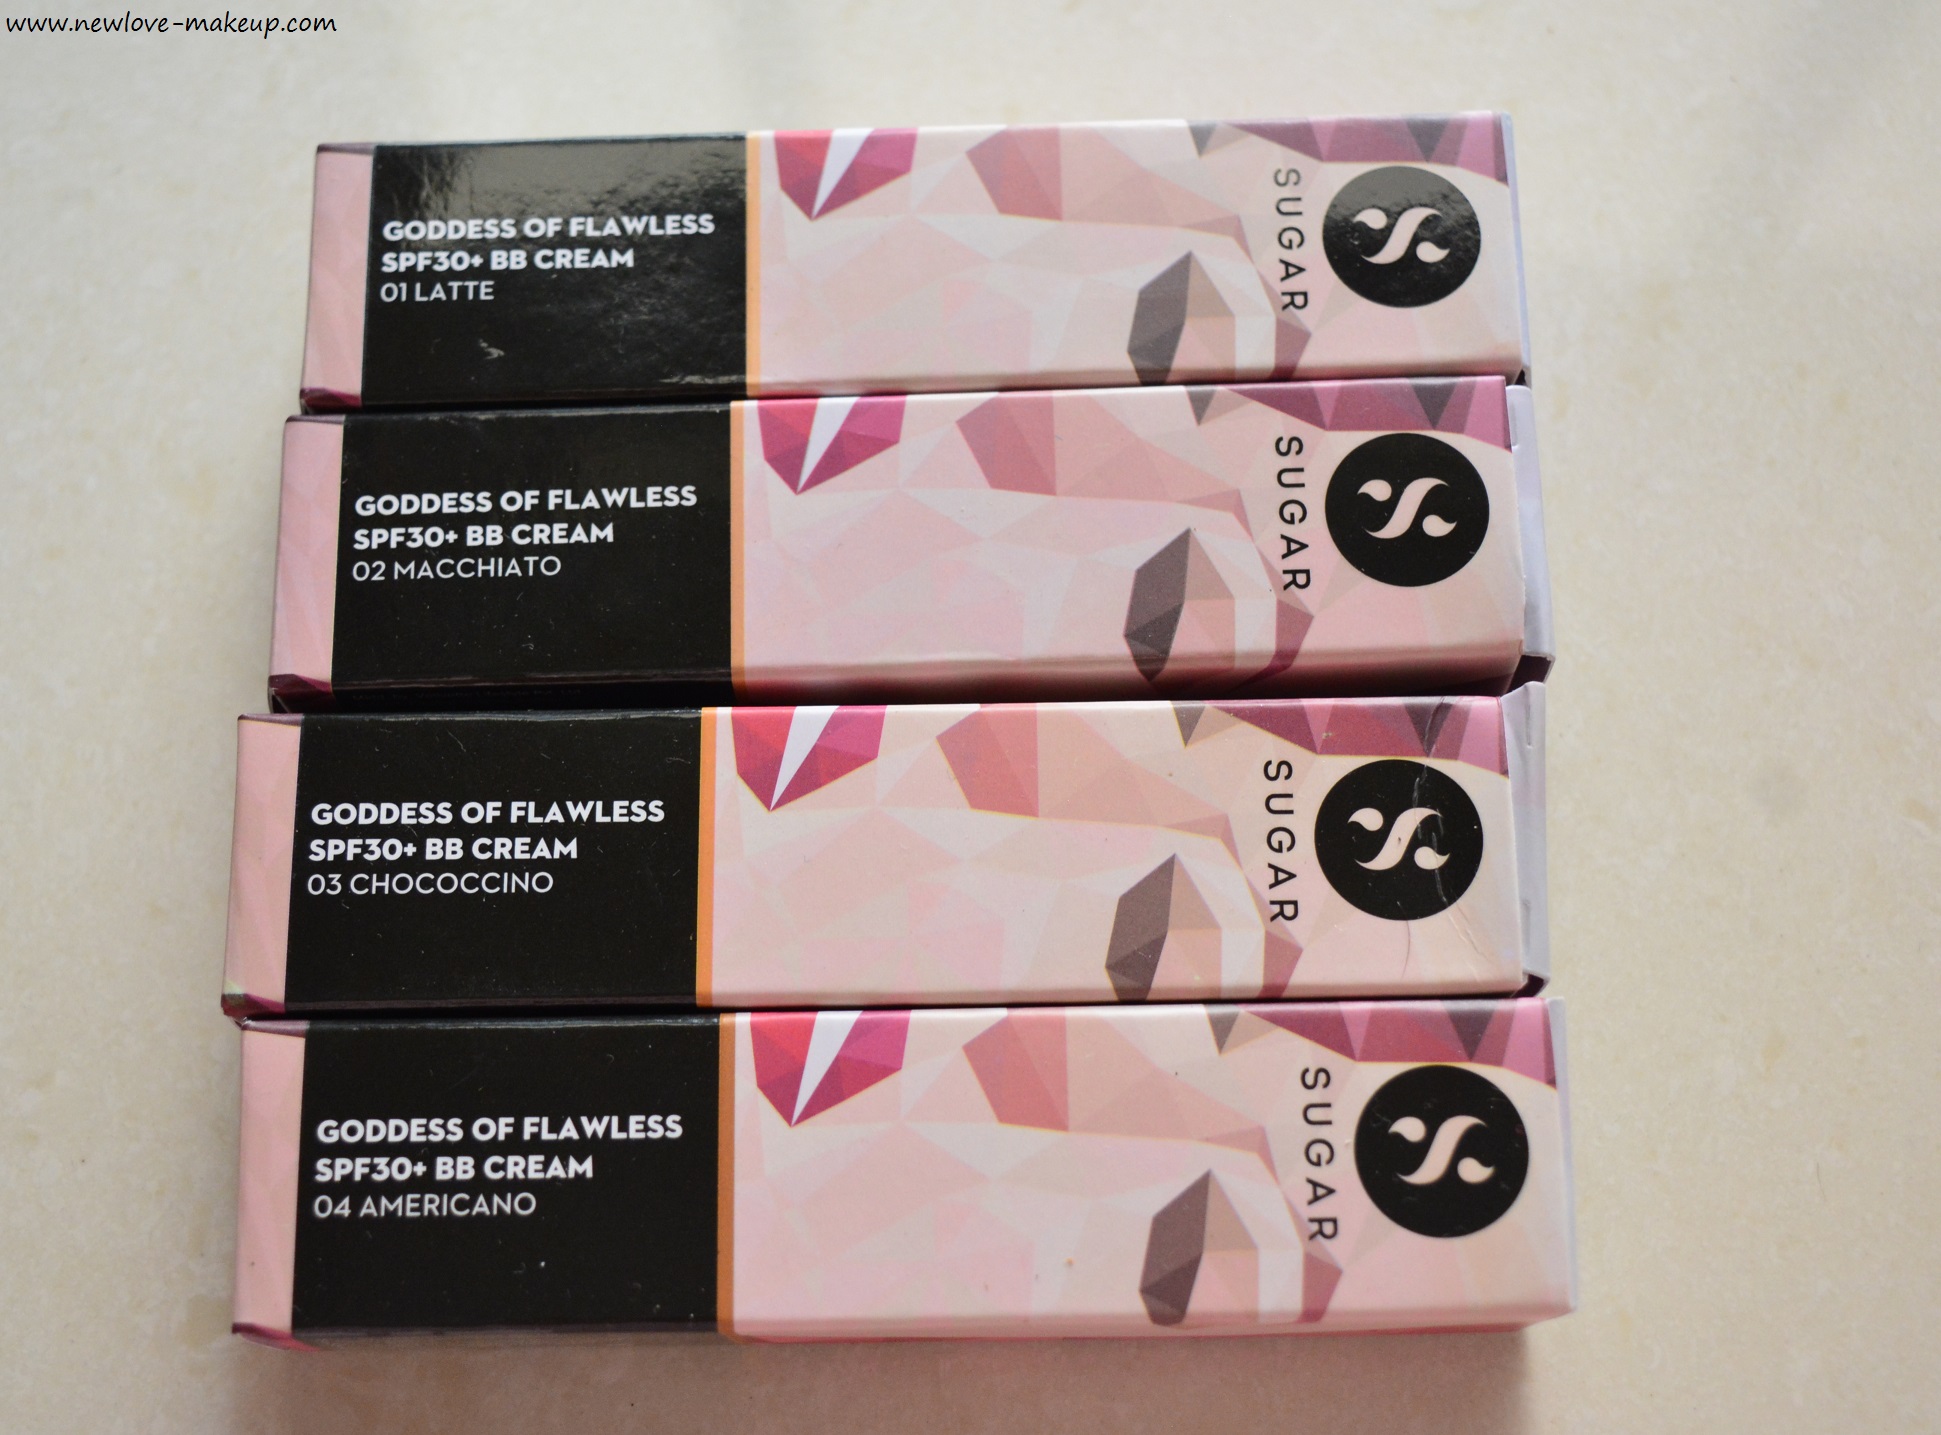 Sugar Cosmetics Goddess of Flawless SPF30+ BB Cream Review, Swatches